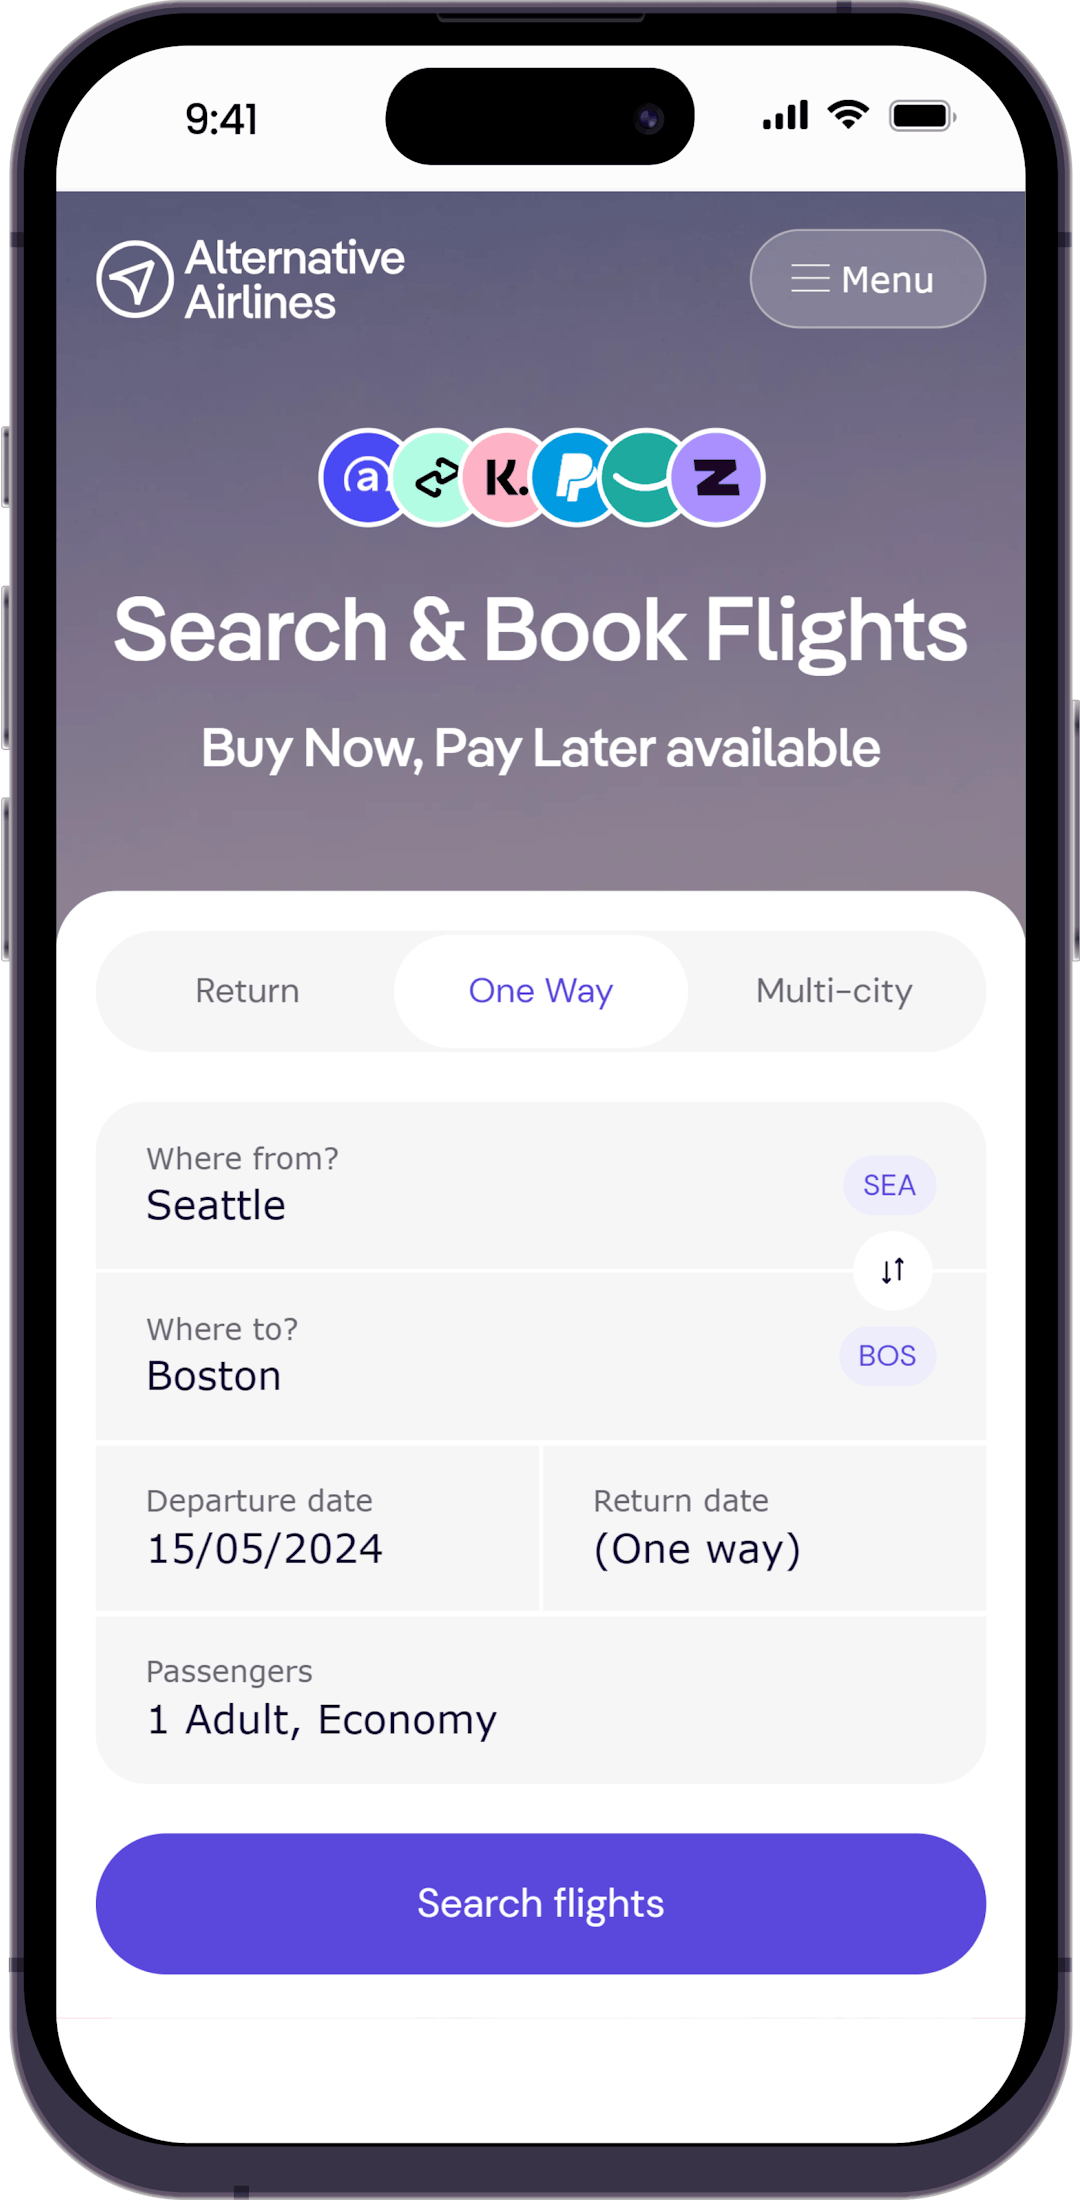 Step 1 - Search for flights in search form